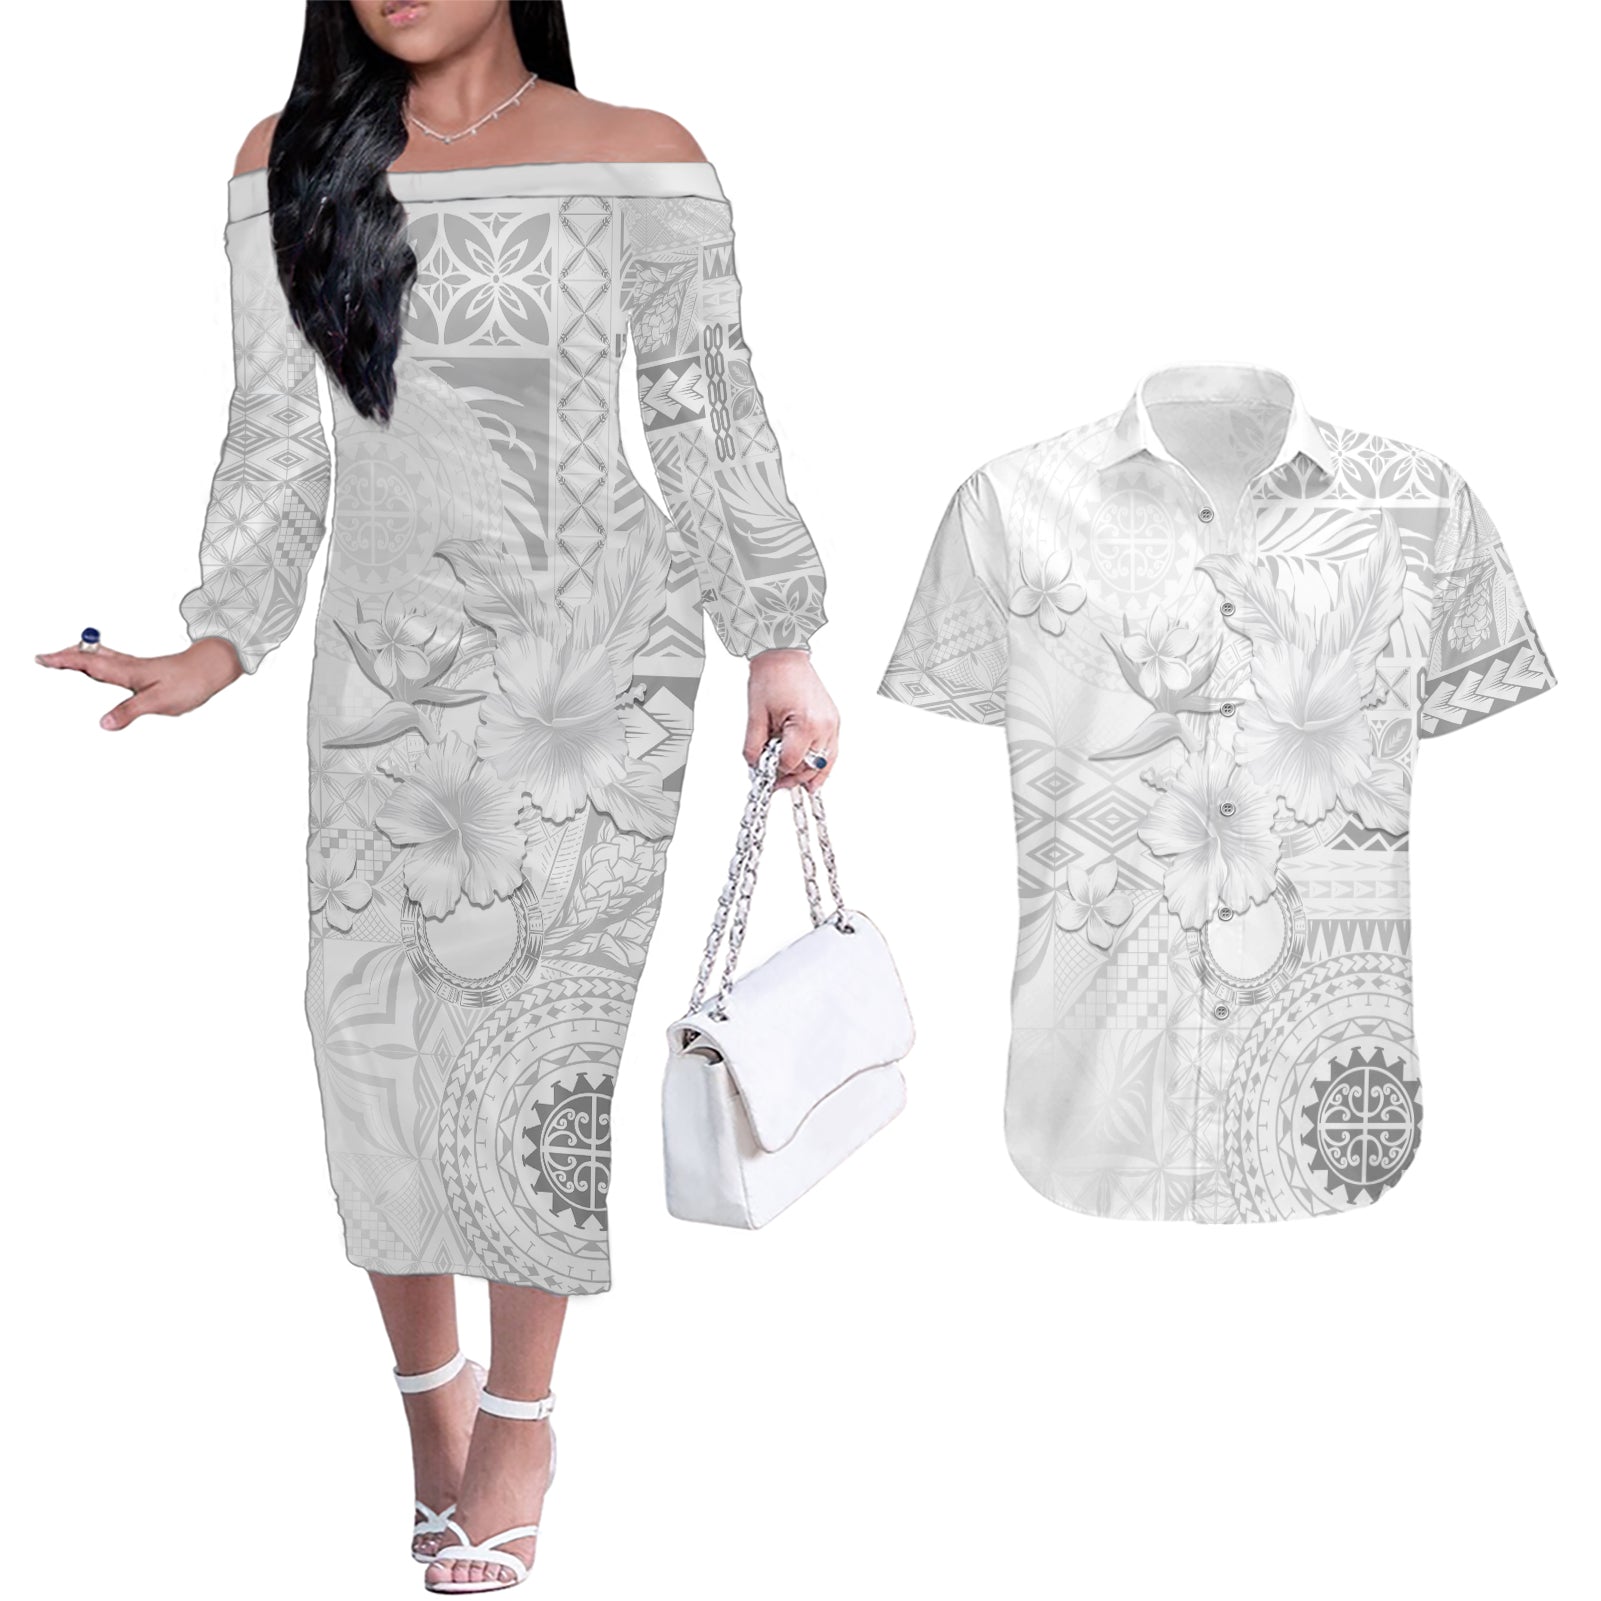 Samoa Siapo Pattern With White Hibiscus Couples Matching Off The Shoulder Long Sleeve Dress and Hawaiian Shirt LT05 White - Polynesian Pride